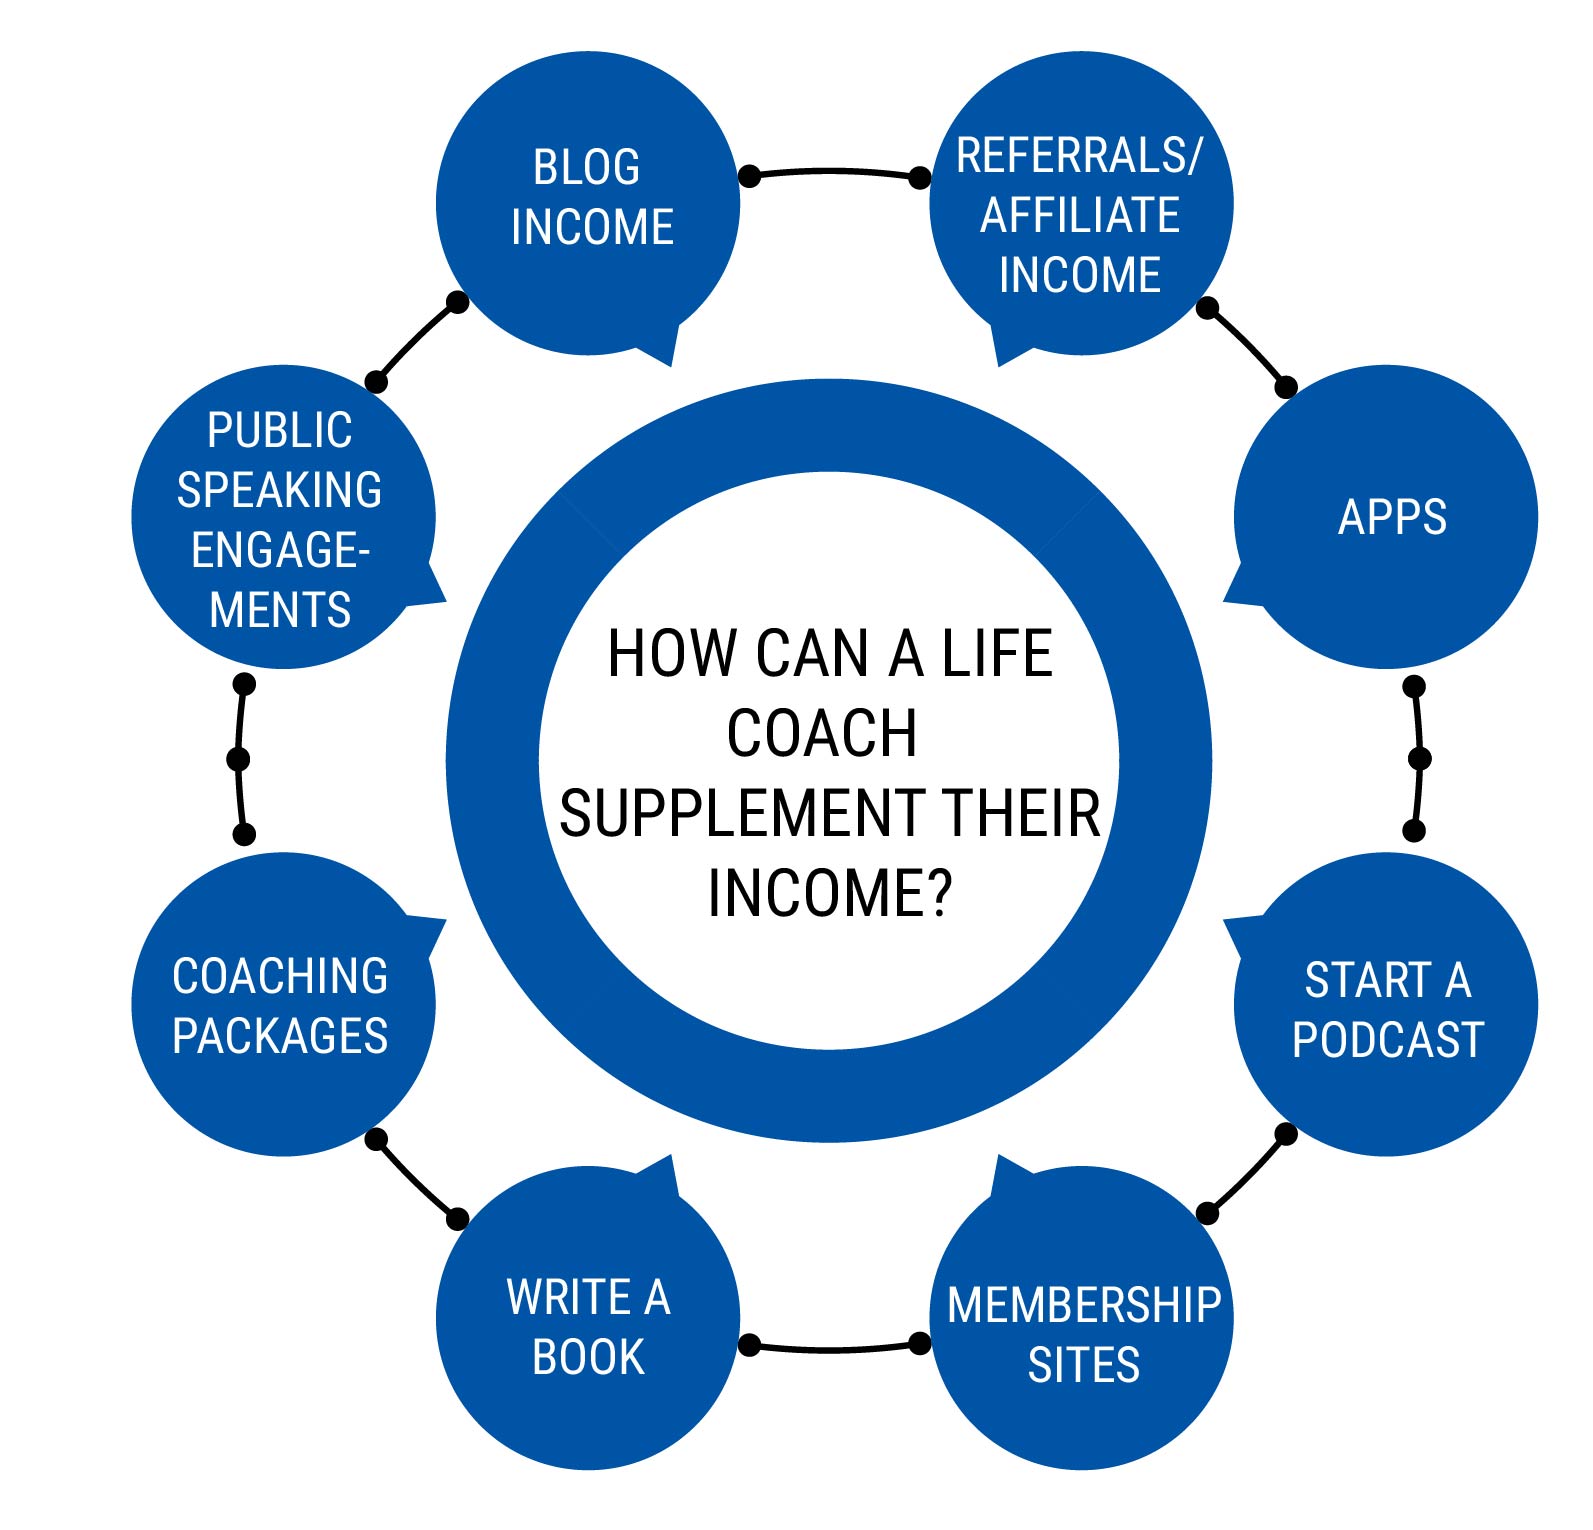 HOW CAN A LIFE COACH SUPPLIMENT THEIR INCOME